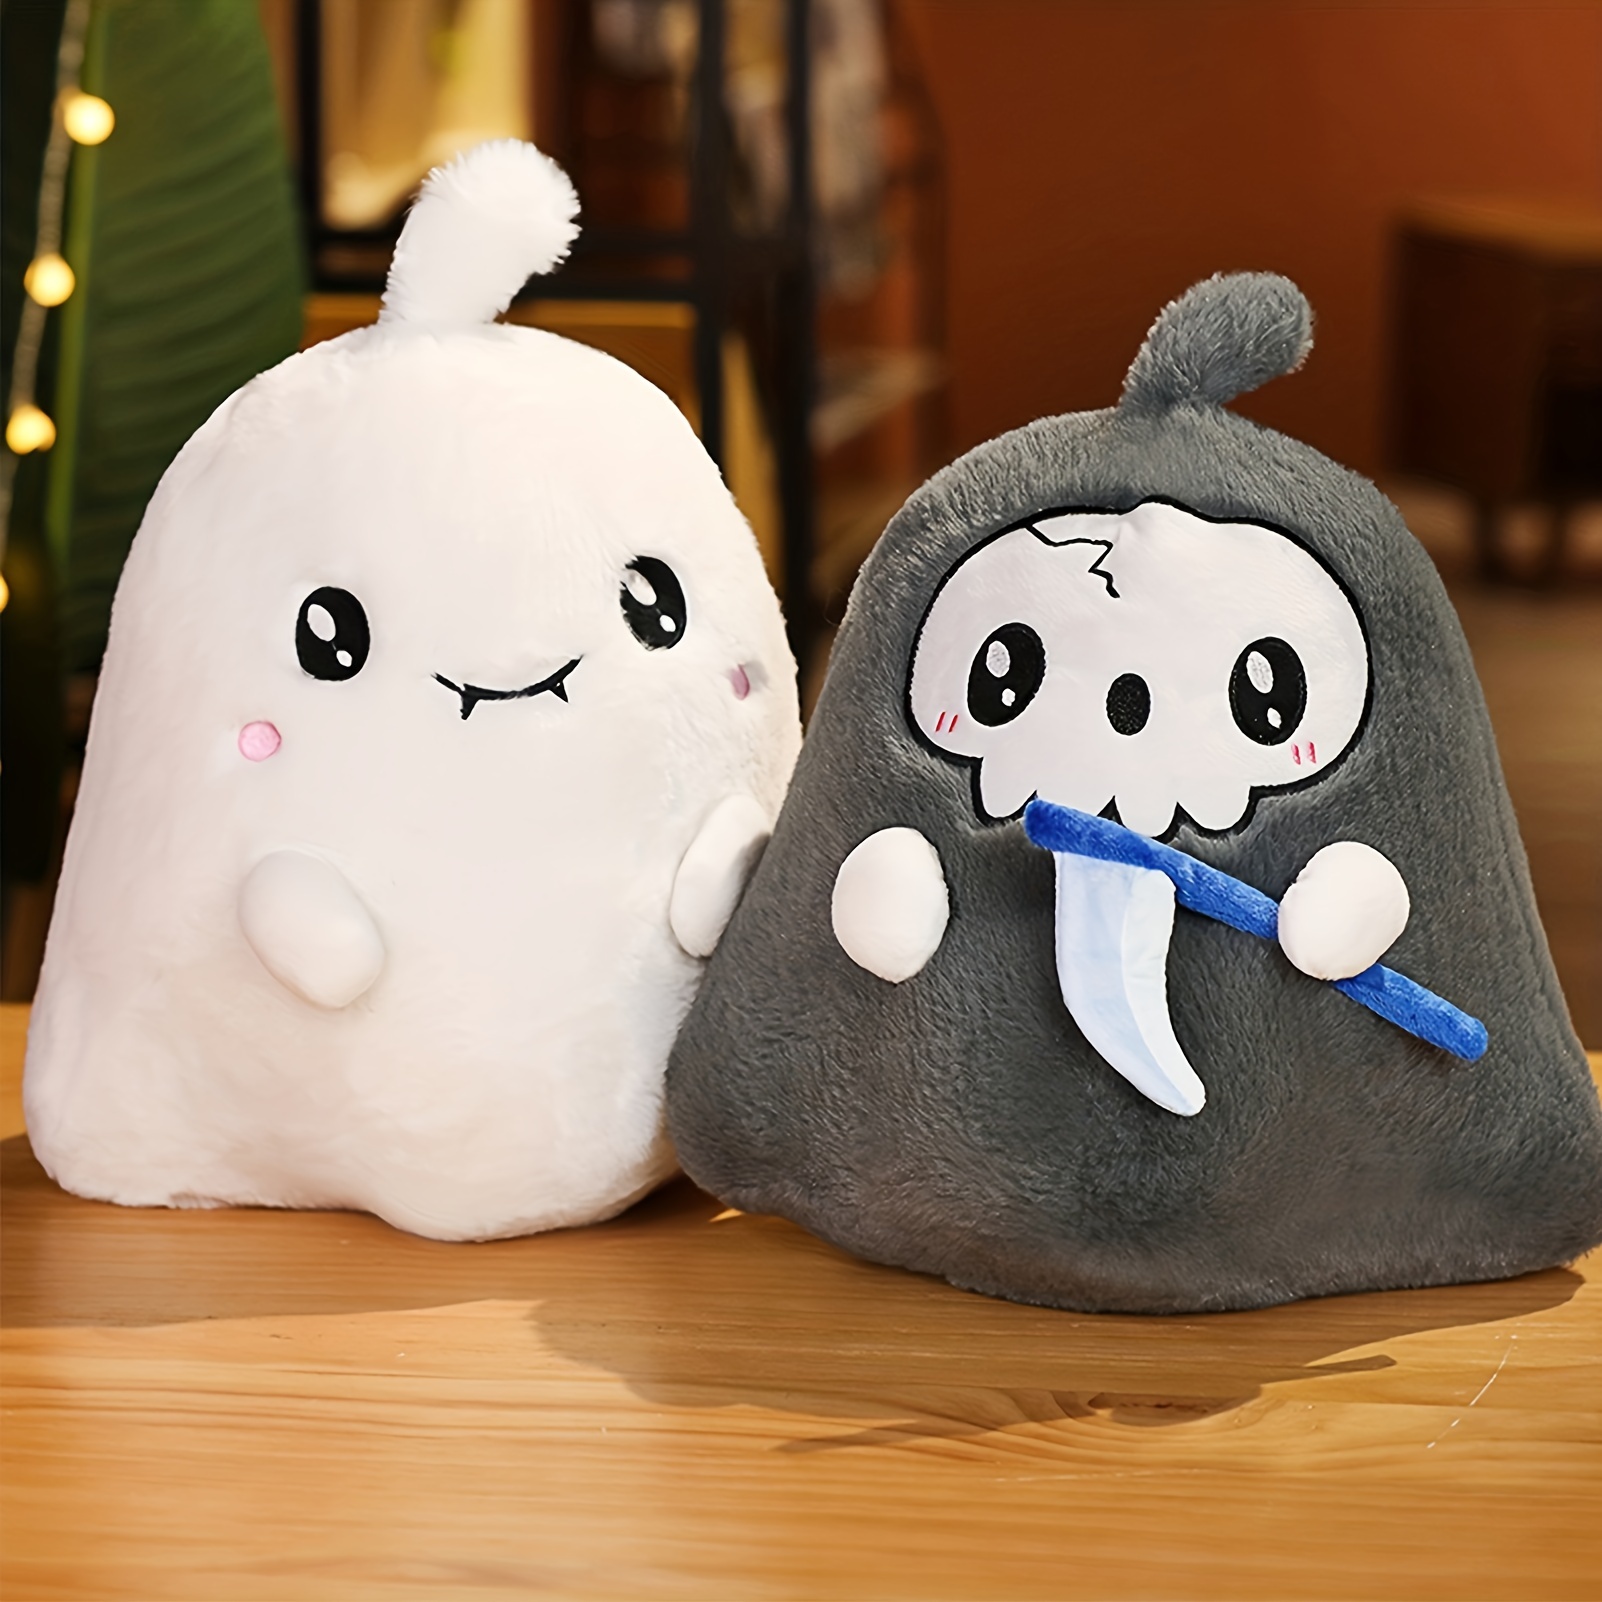 

7.87" Ghost Plush Toys - Black & White Horror Monster Dolls For Halloween Decor, Soft Cartoon Style For Young Ones